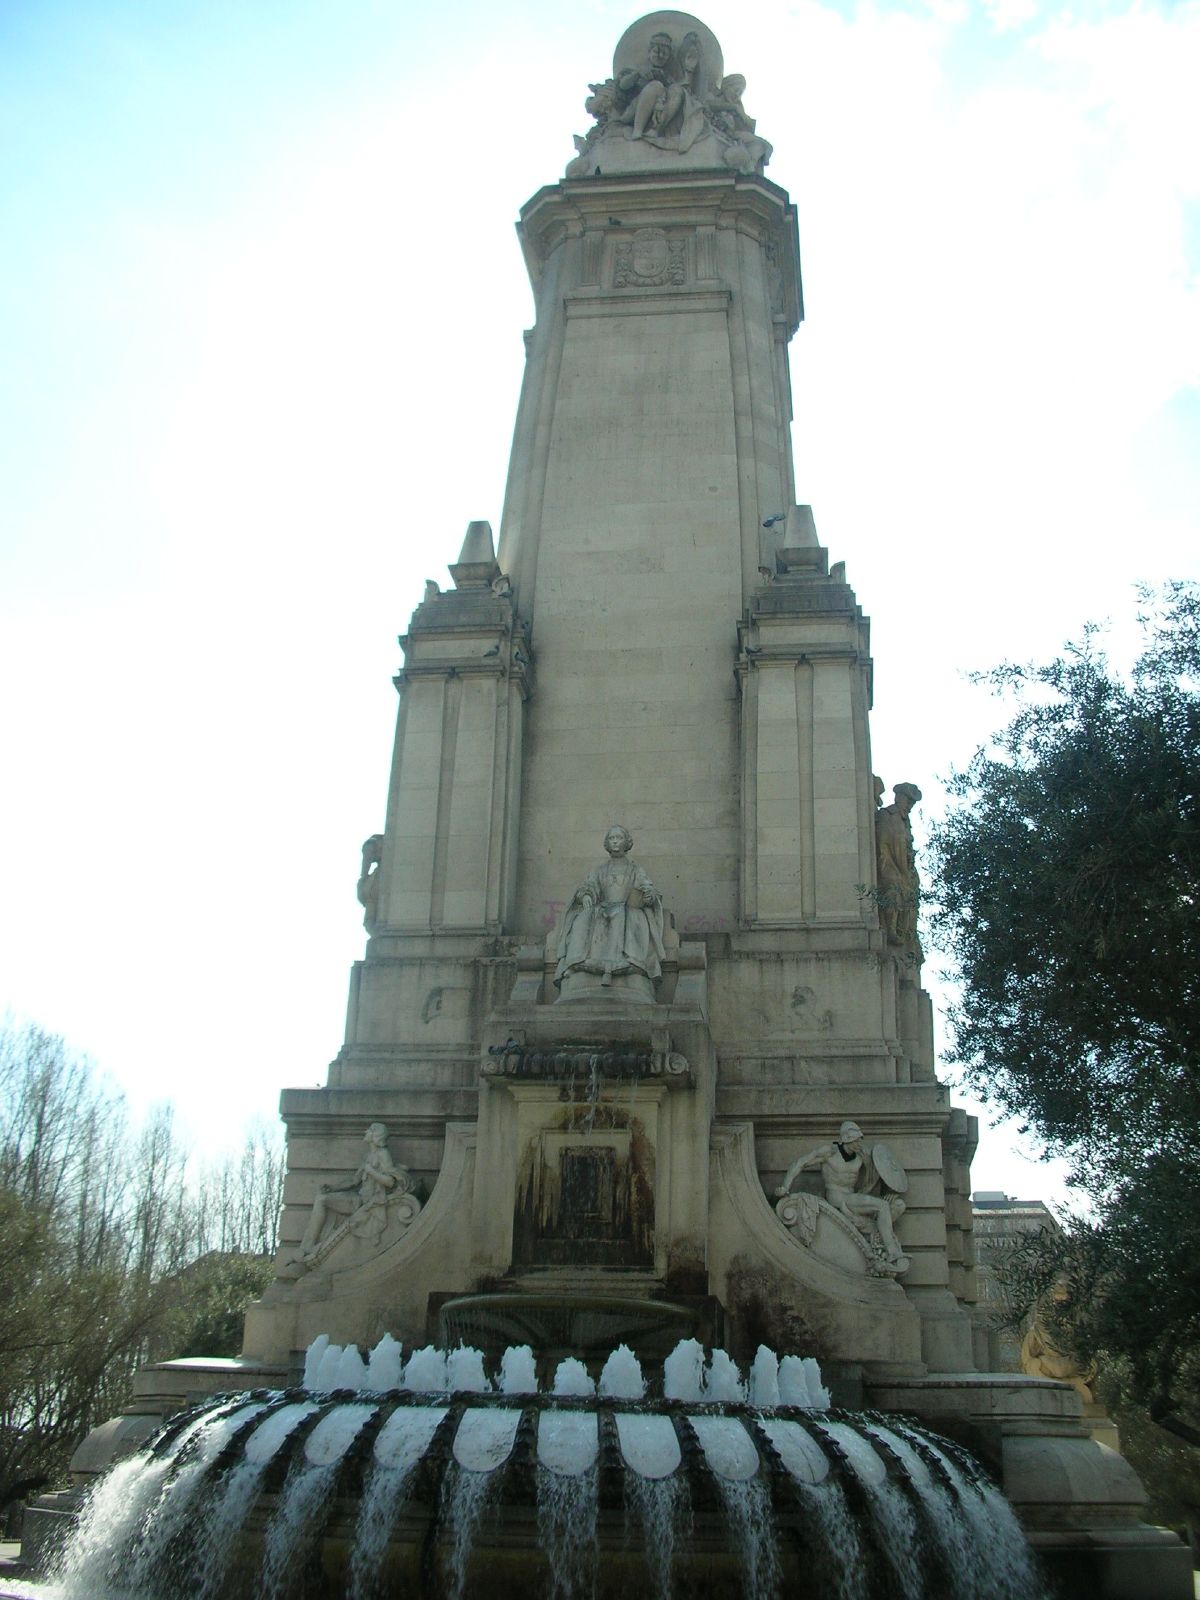 a large stone statue with fountain below it